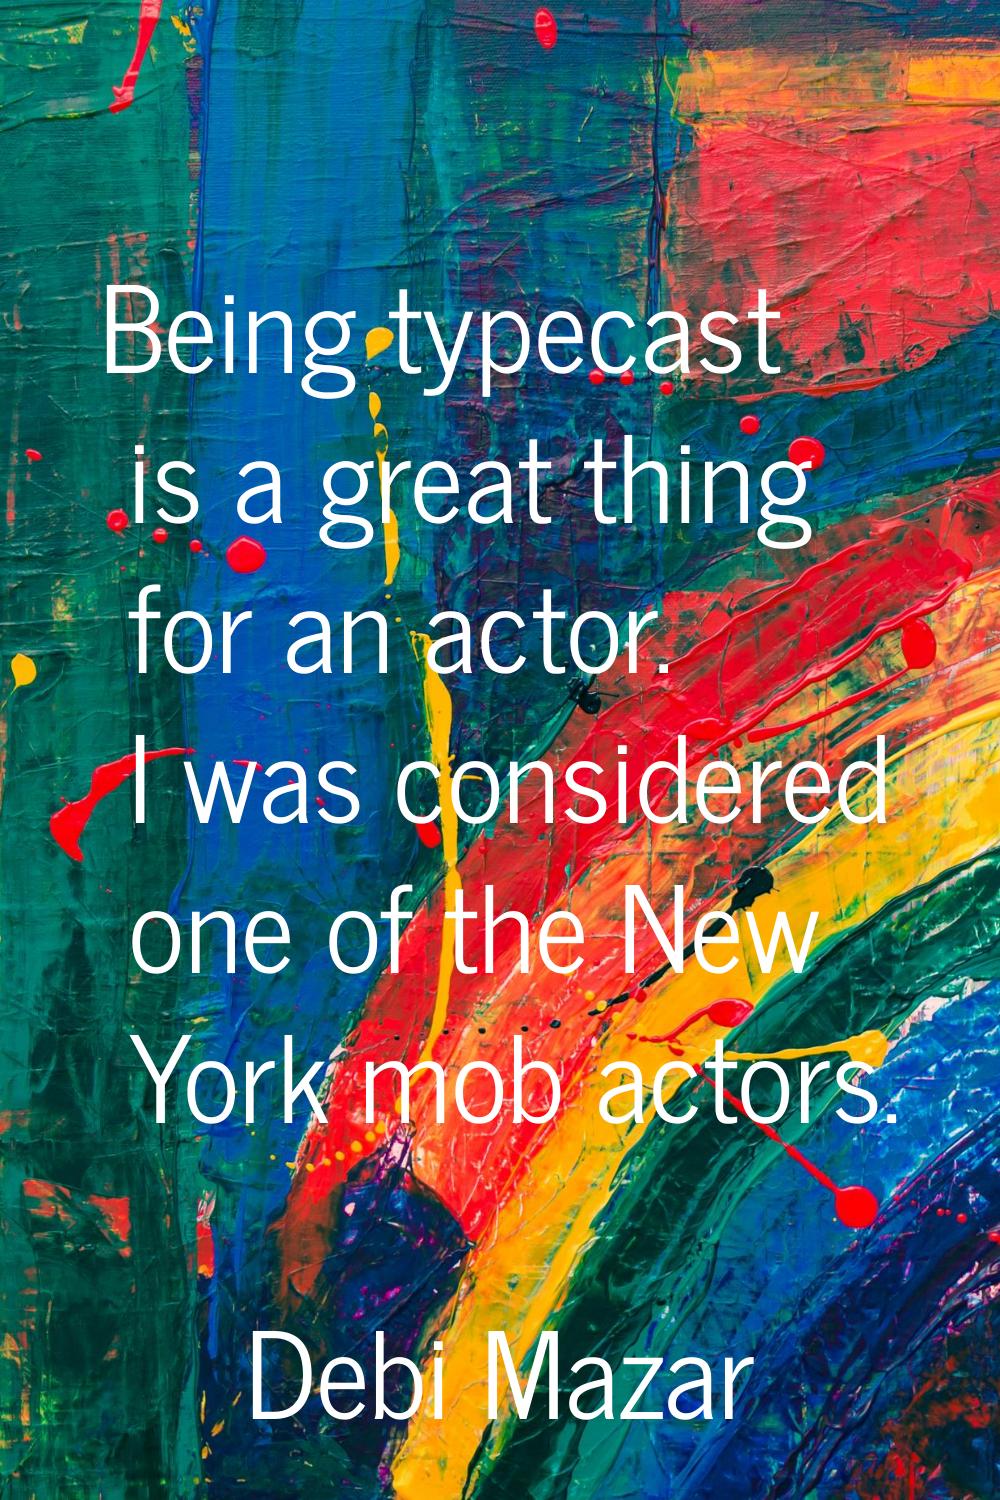 Being typecast is a great thing for an actor. I was considered one of the New York mob actors.